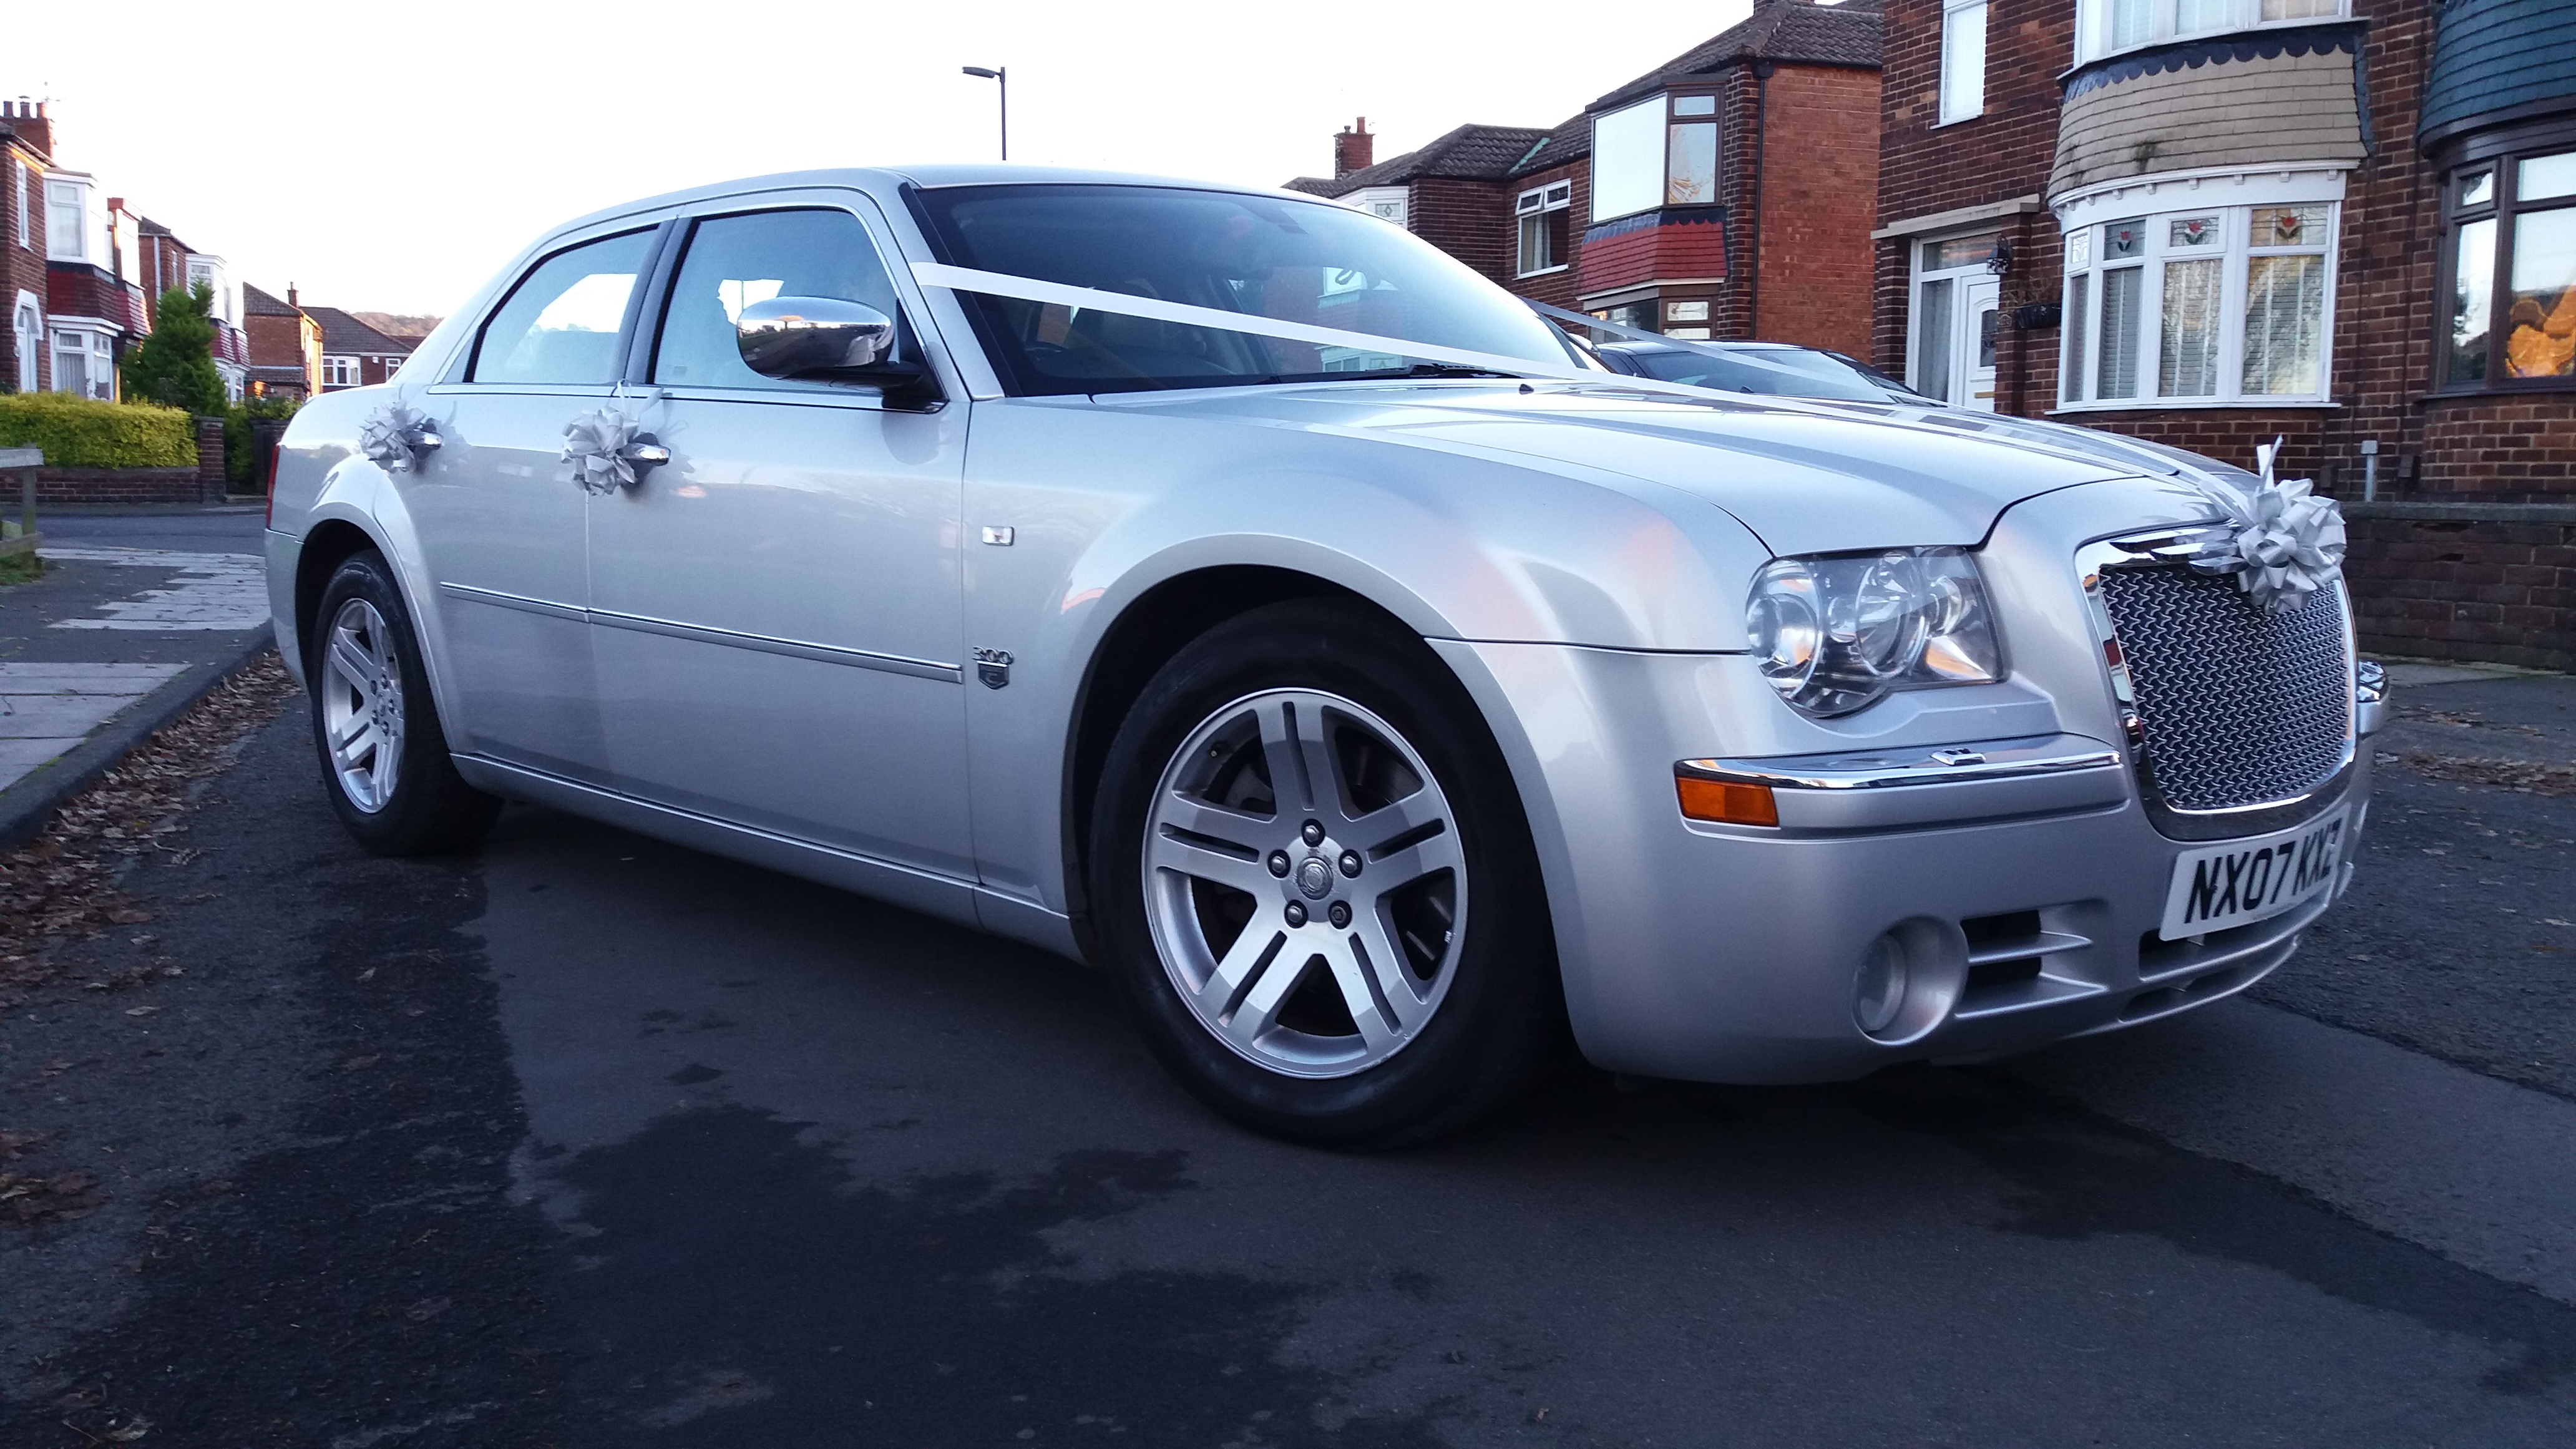 wedding cars and limousines Middlesbrough and the north east. Best service at the best price. Cheap wedding car hire. Prom cars north east.